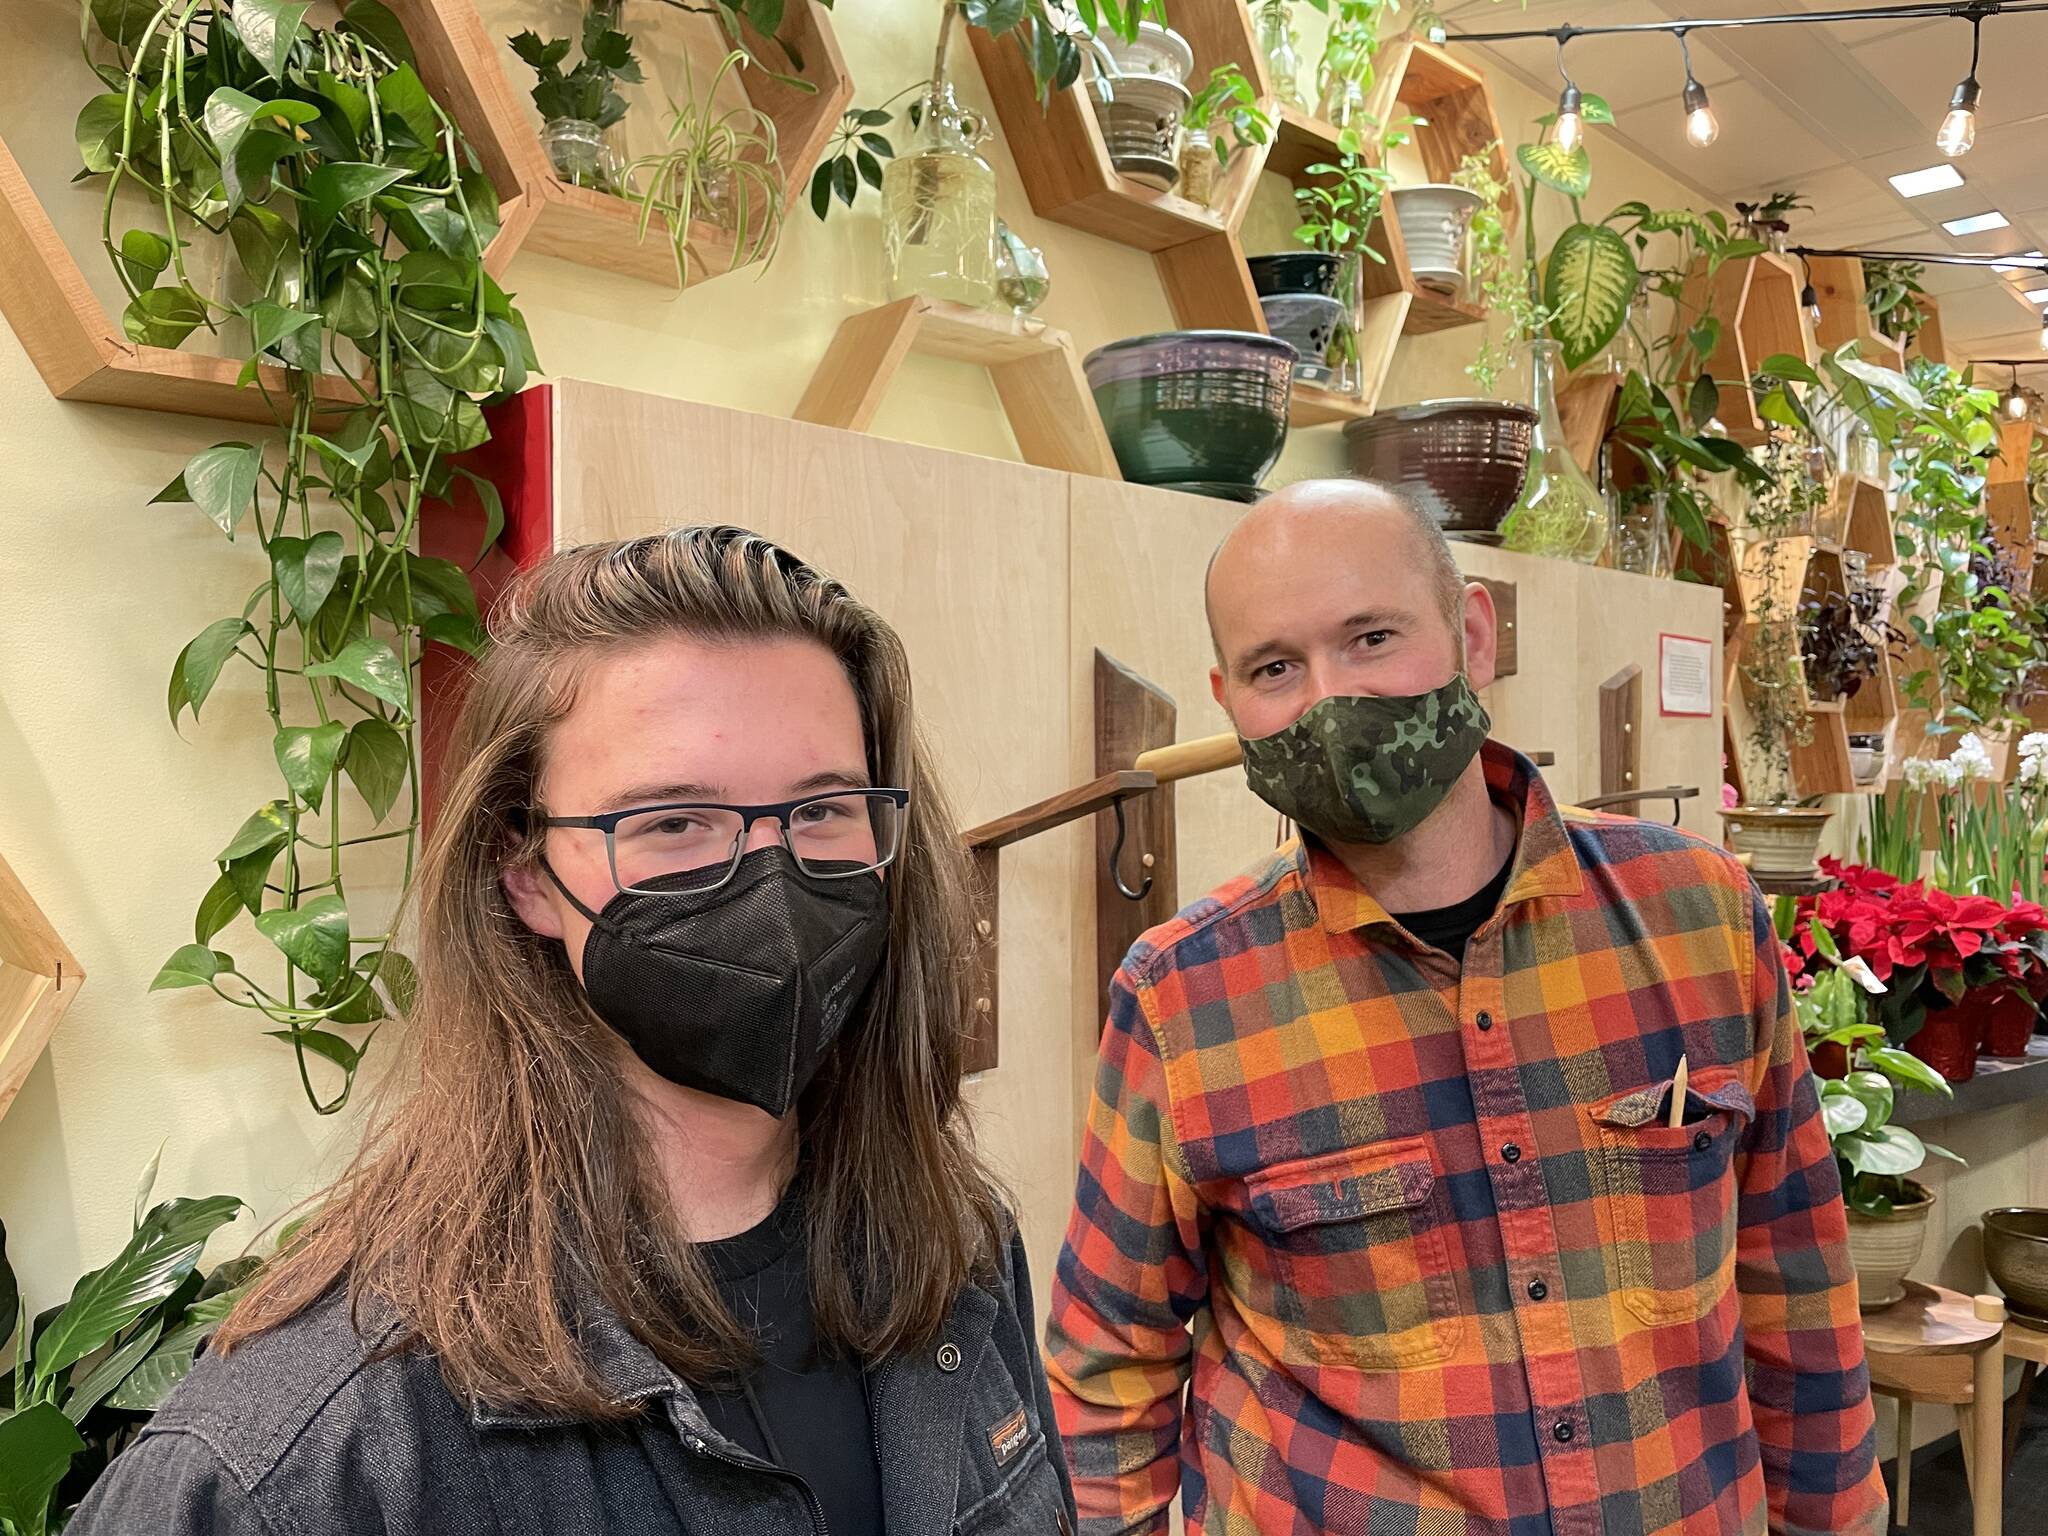 Liam Penn, left, and Henry Webb, right, were featured at the Plant Studio during Gallery Walk on Dec. 3, 2021. (Michael S. Lockett / Juneau Empire)